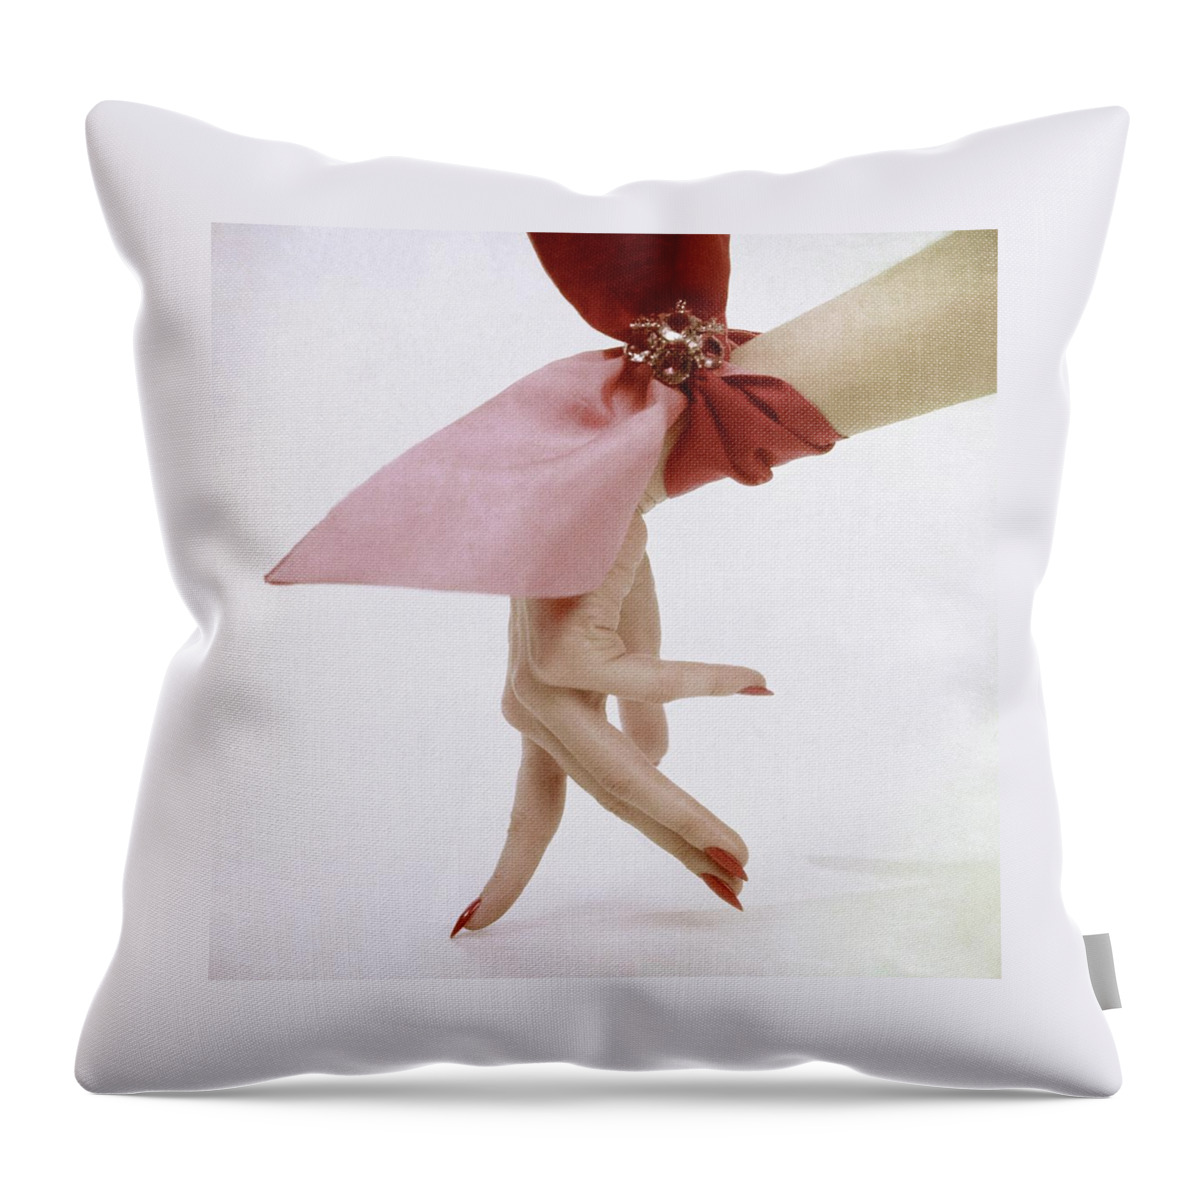 A Hand With A Wrist Scarf Throw Pillow